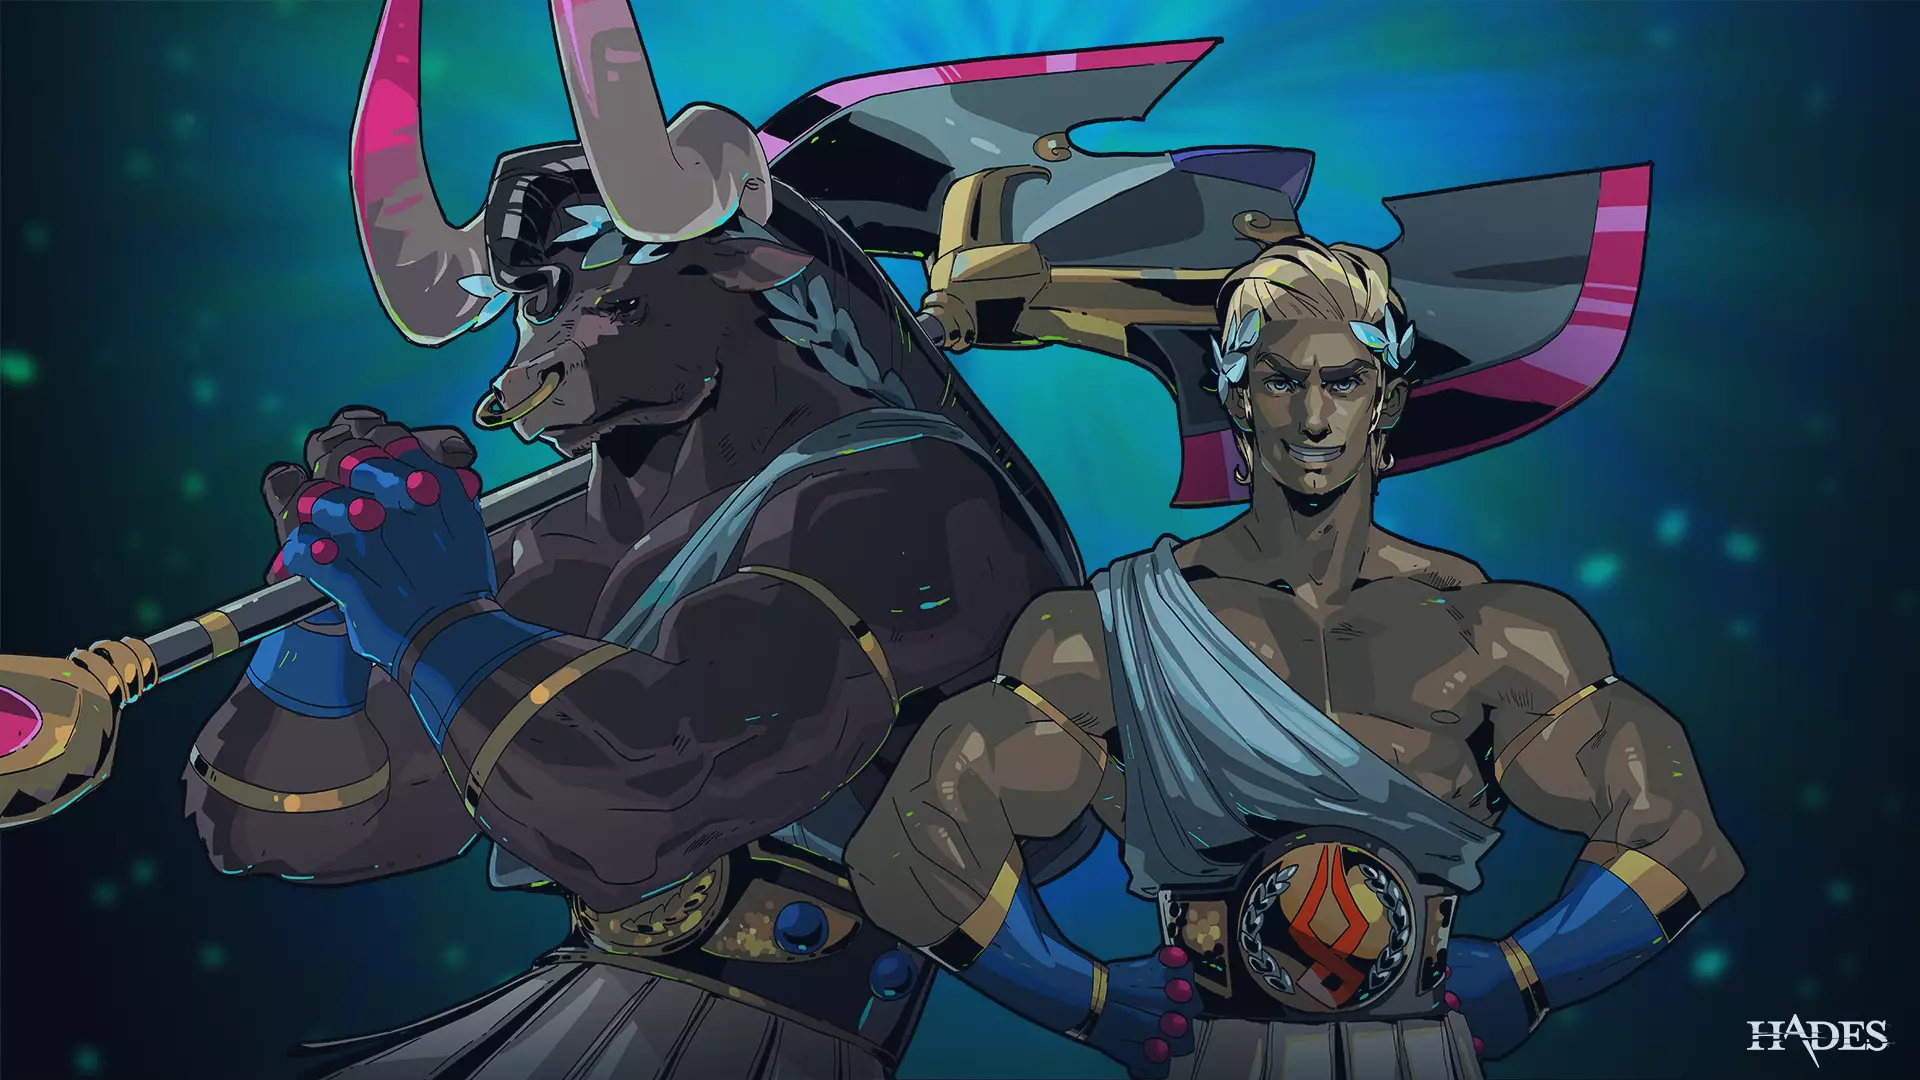 Asterius and Theseus from Hades / credit: Supergiant Games